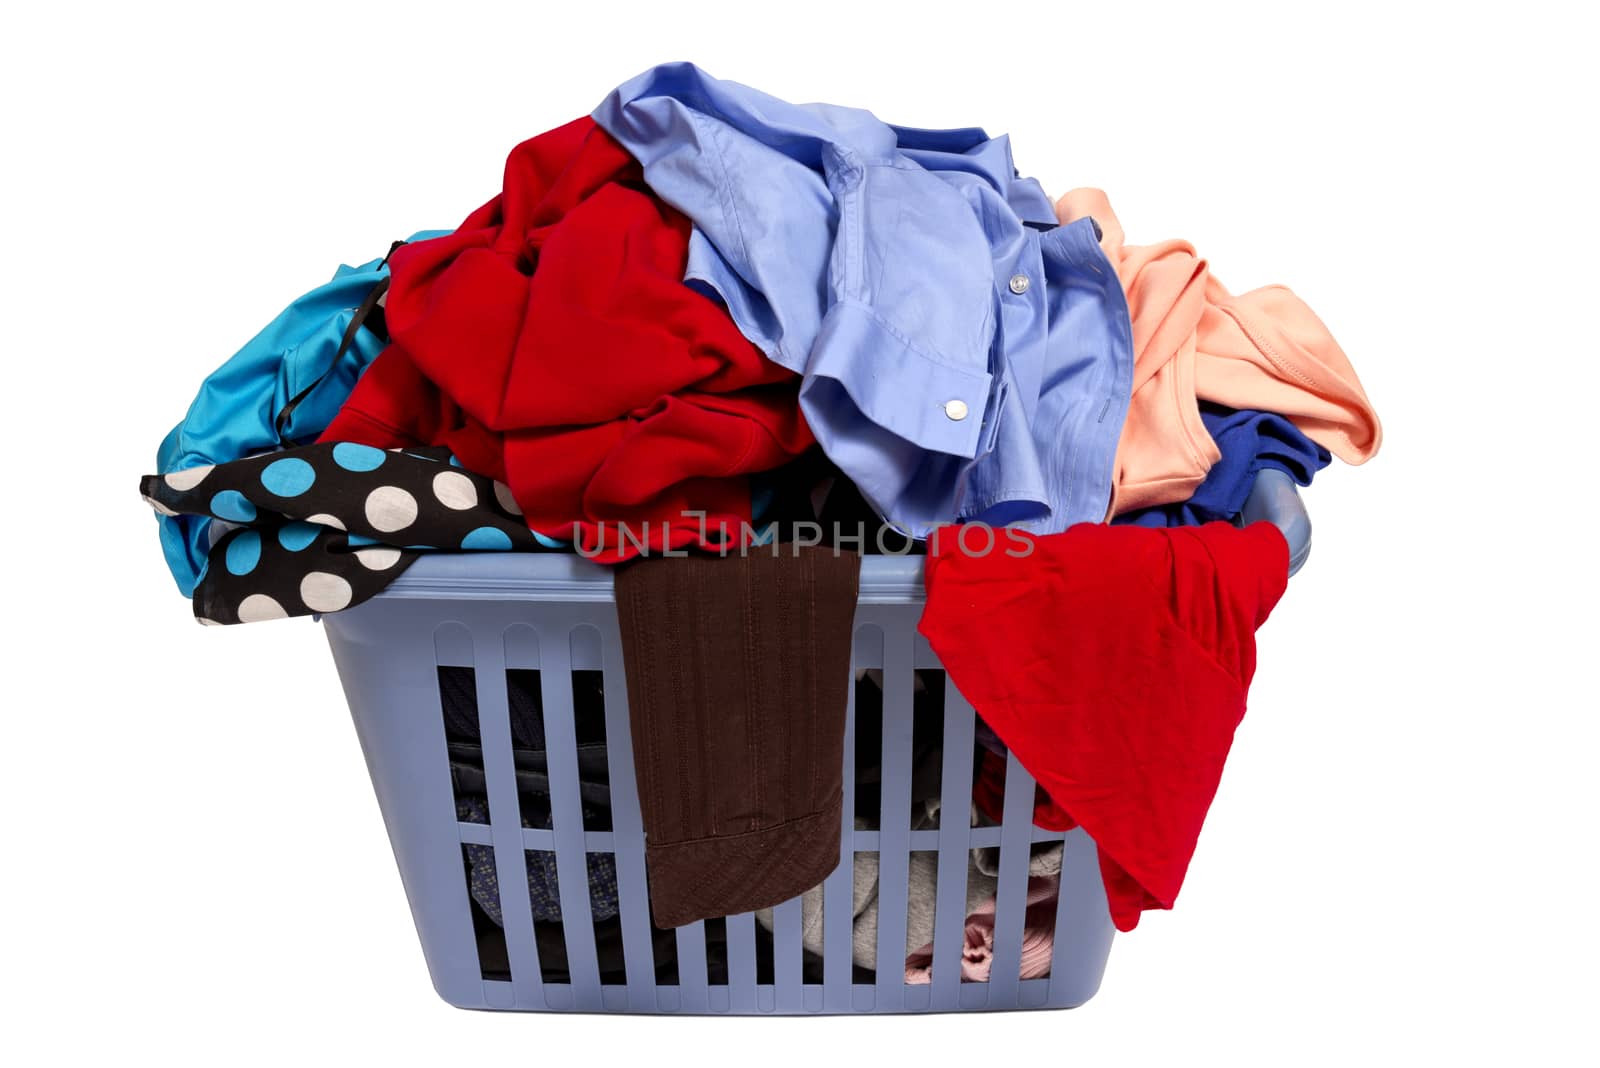 Laundry Basket Of Clothes by stockbuster1